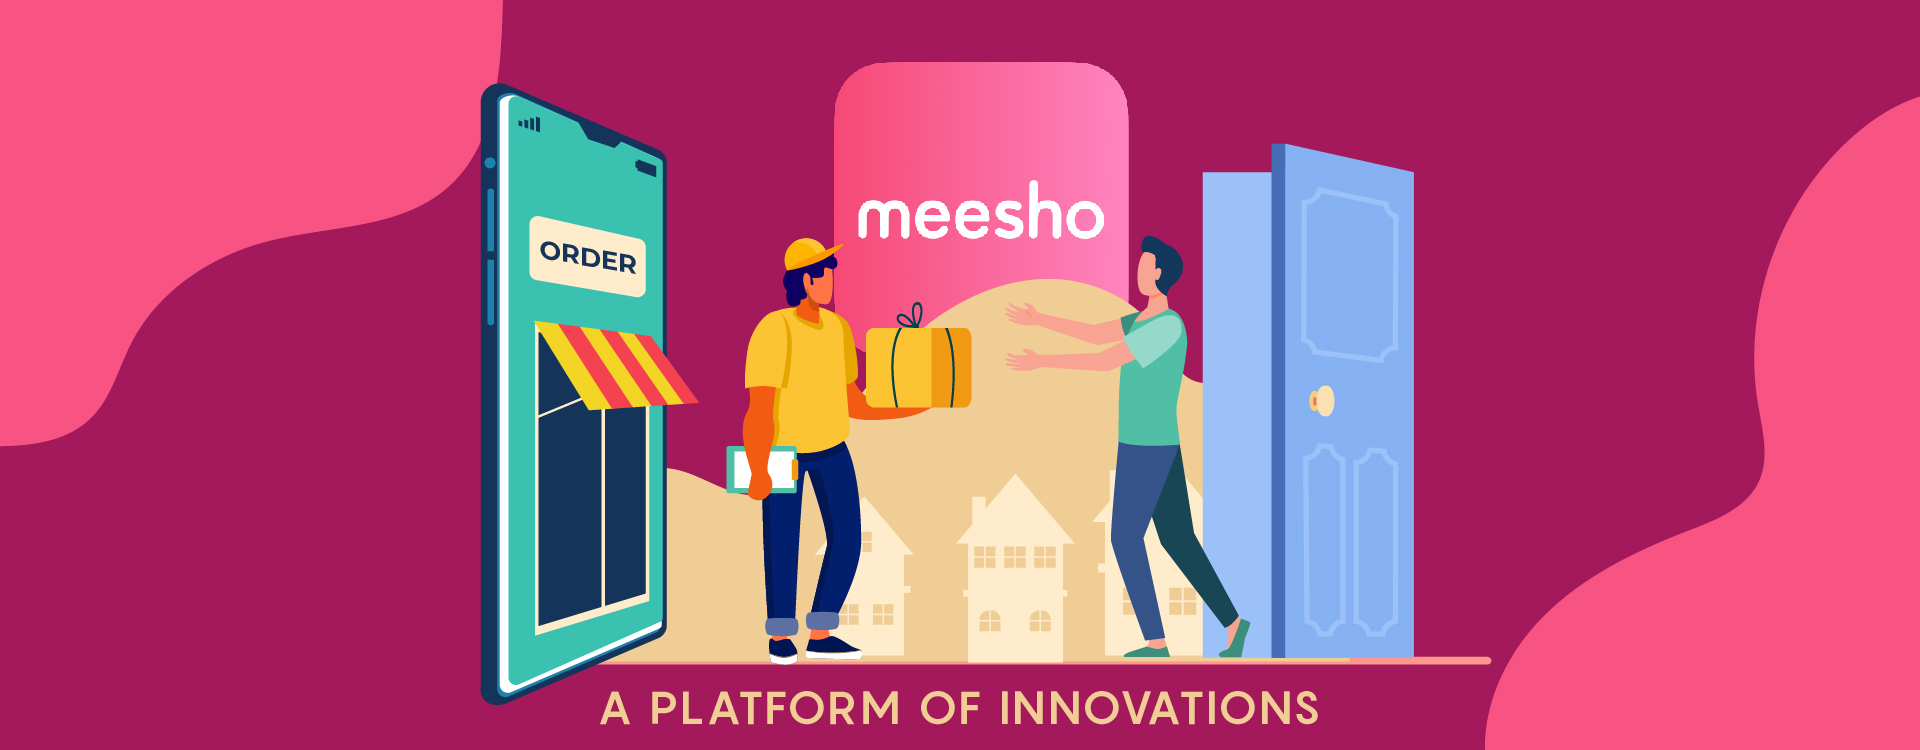 Meesho helping small businesses and MSMEs